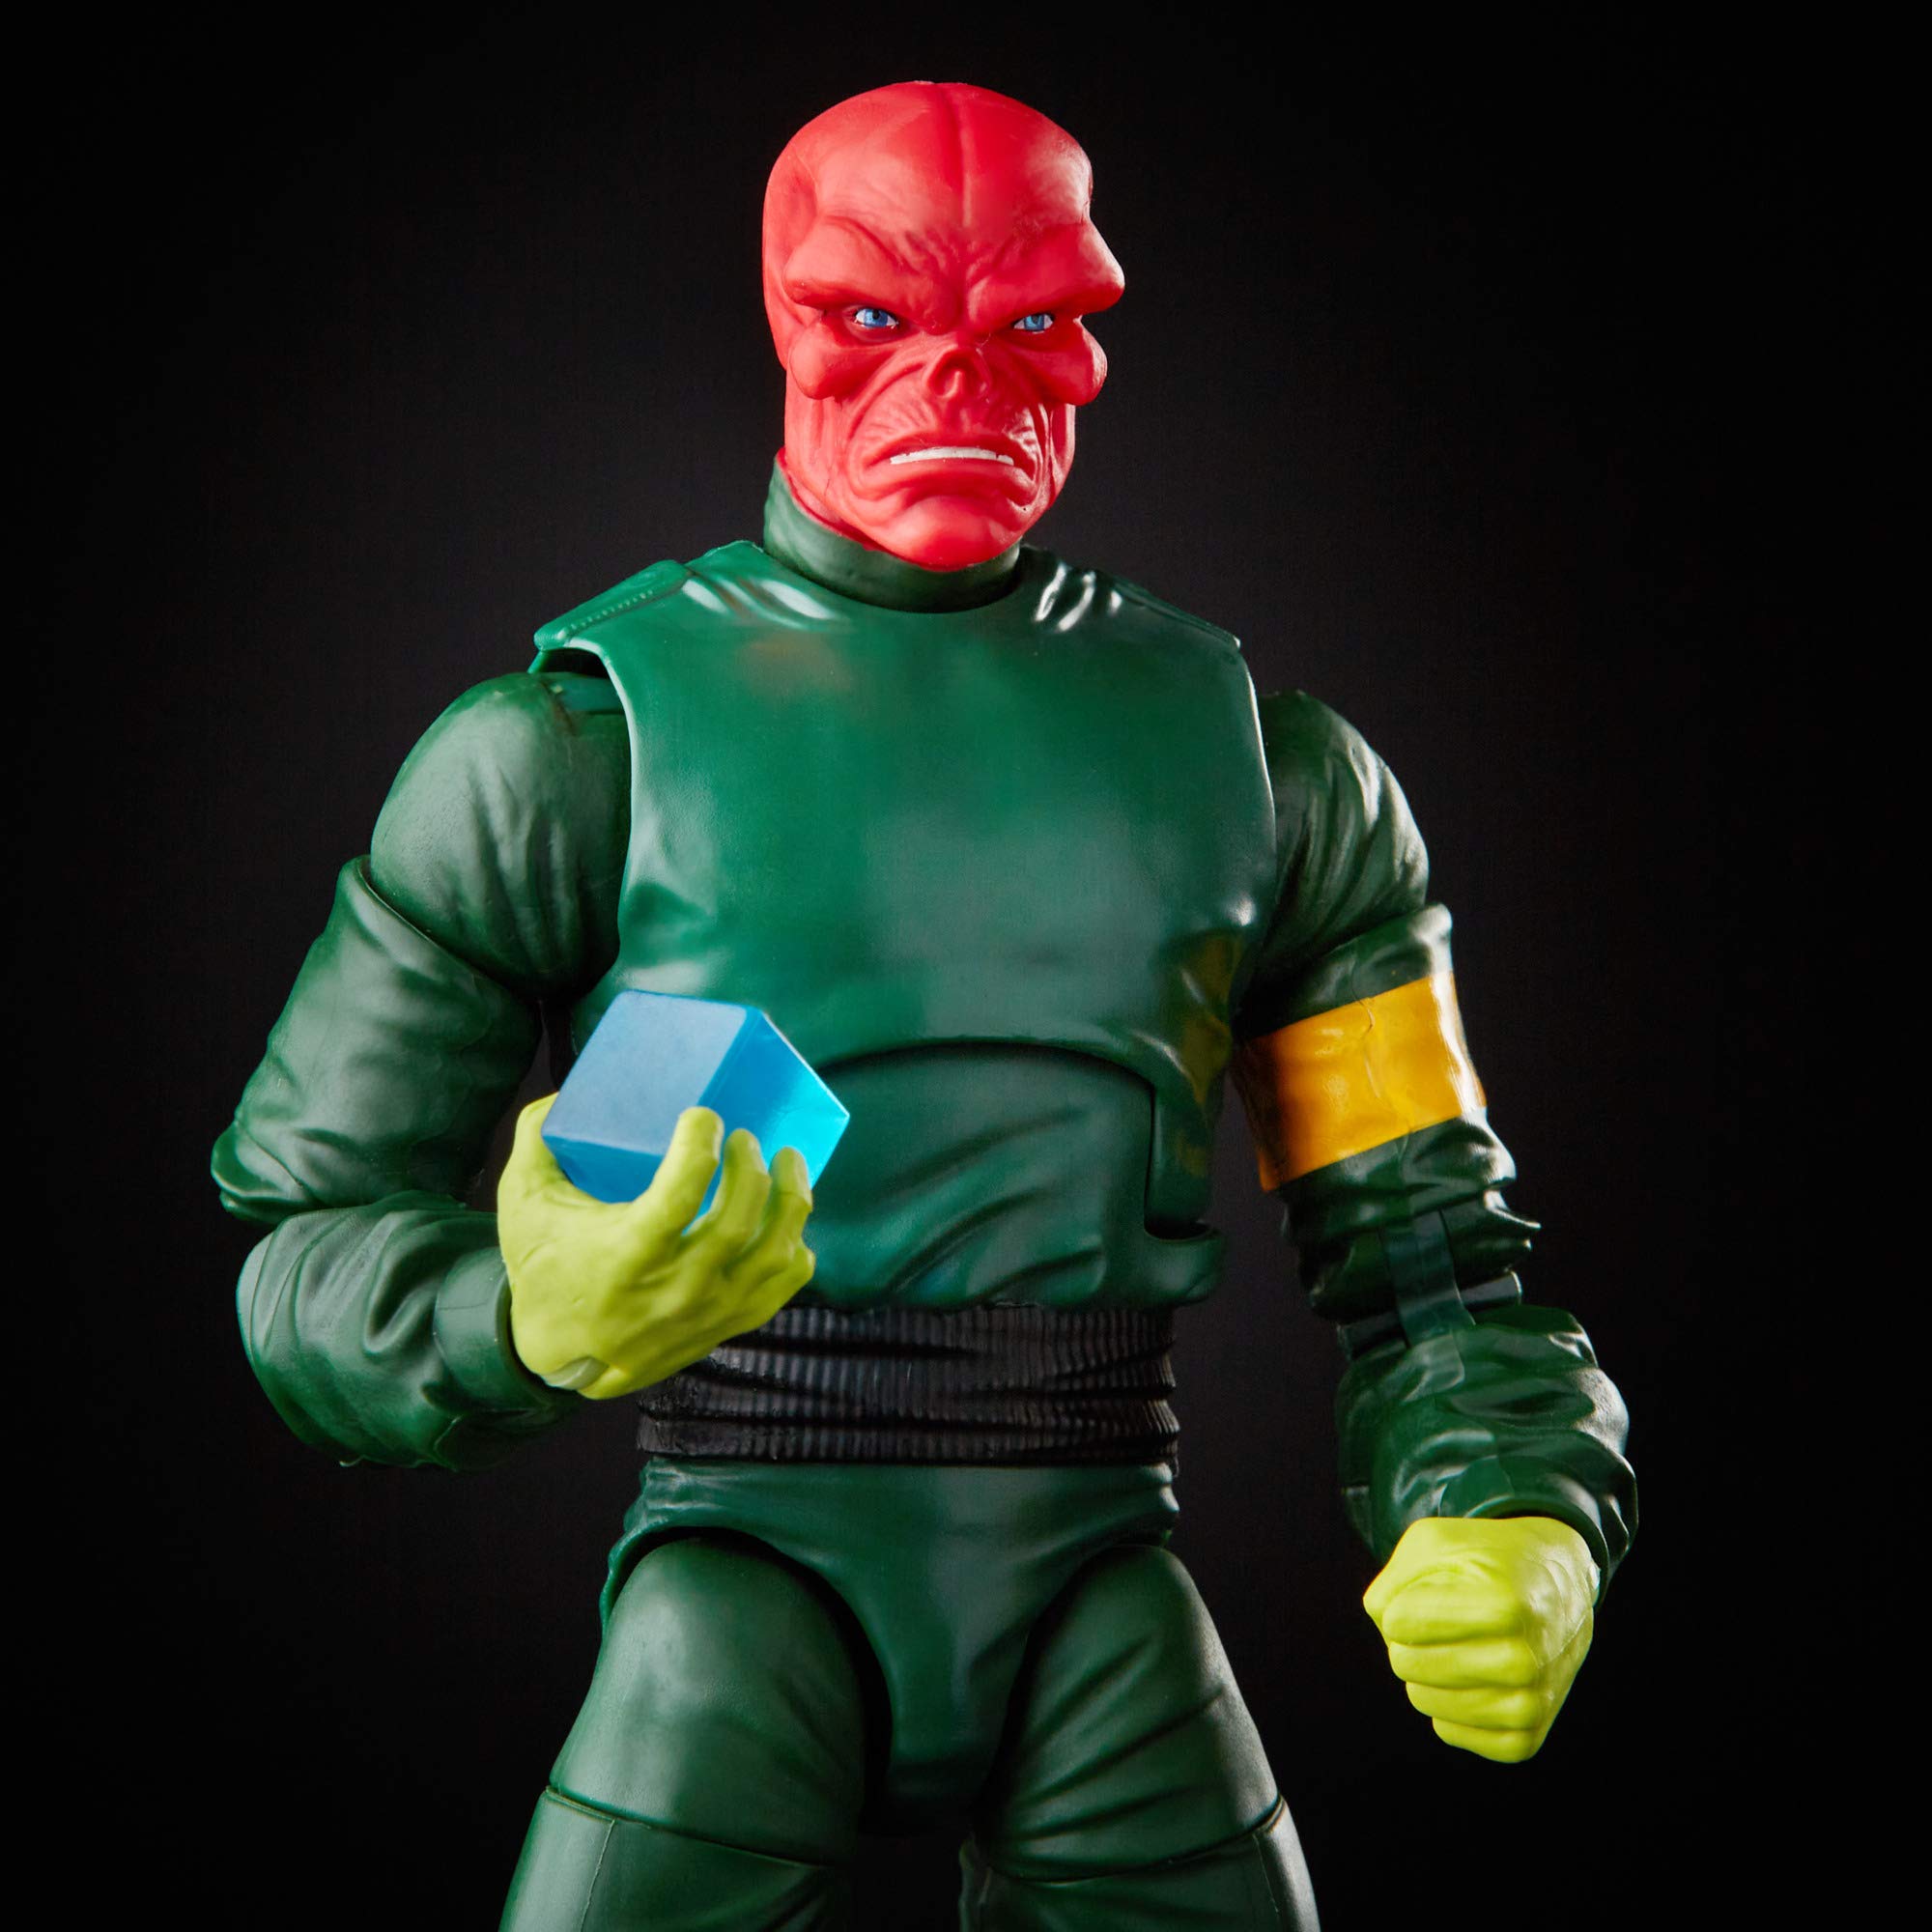 Marvel Hasbro Hasbro Legends Series 6-inch Collectible Action Red Skull Figure and 7 Accessories and 1 Build-a-Figure Part, Premium Design